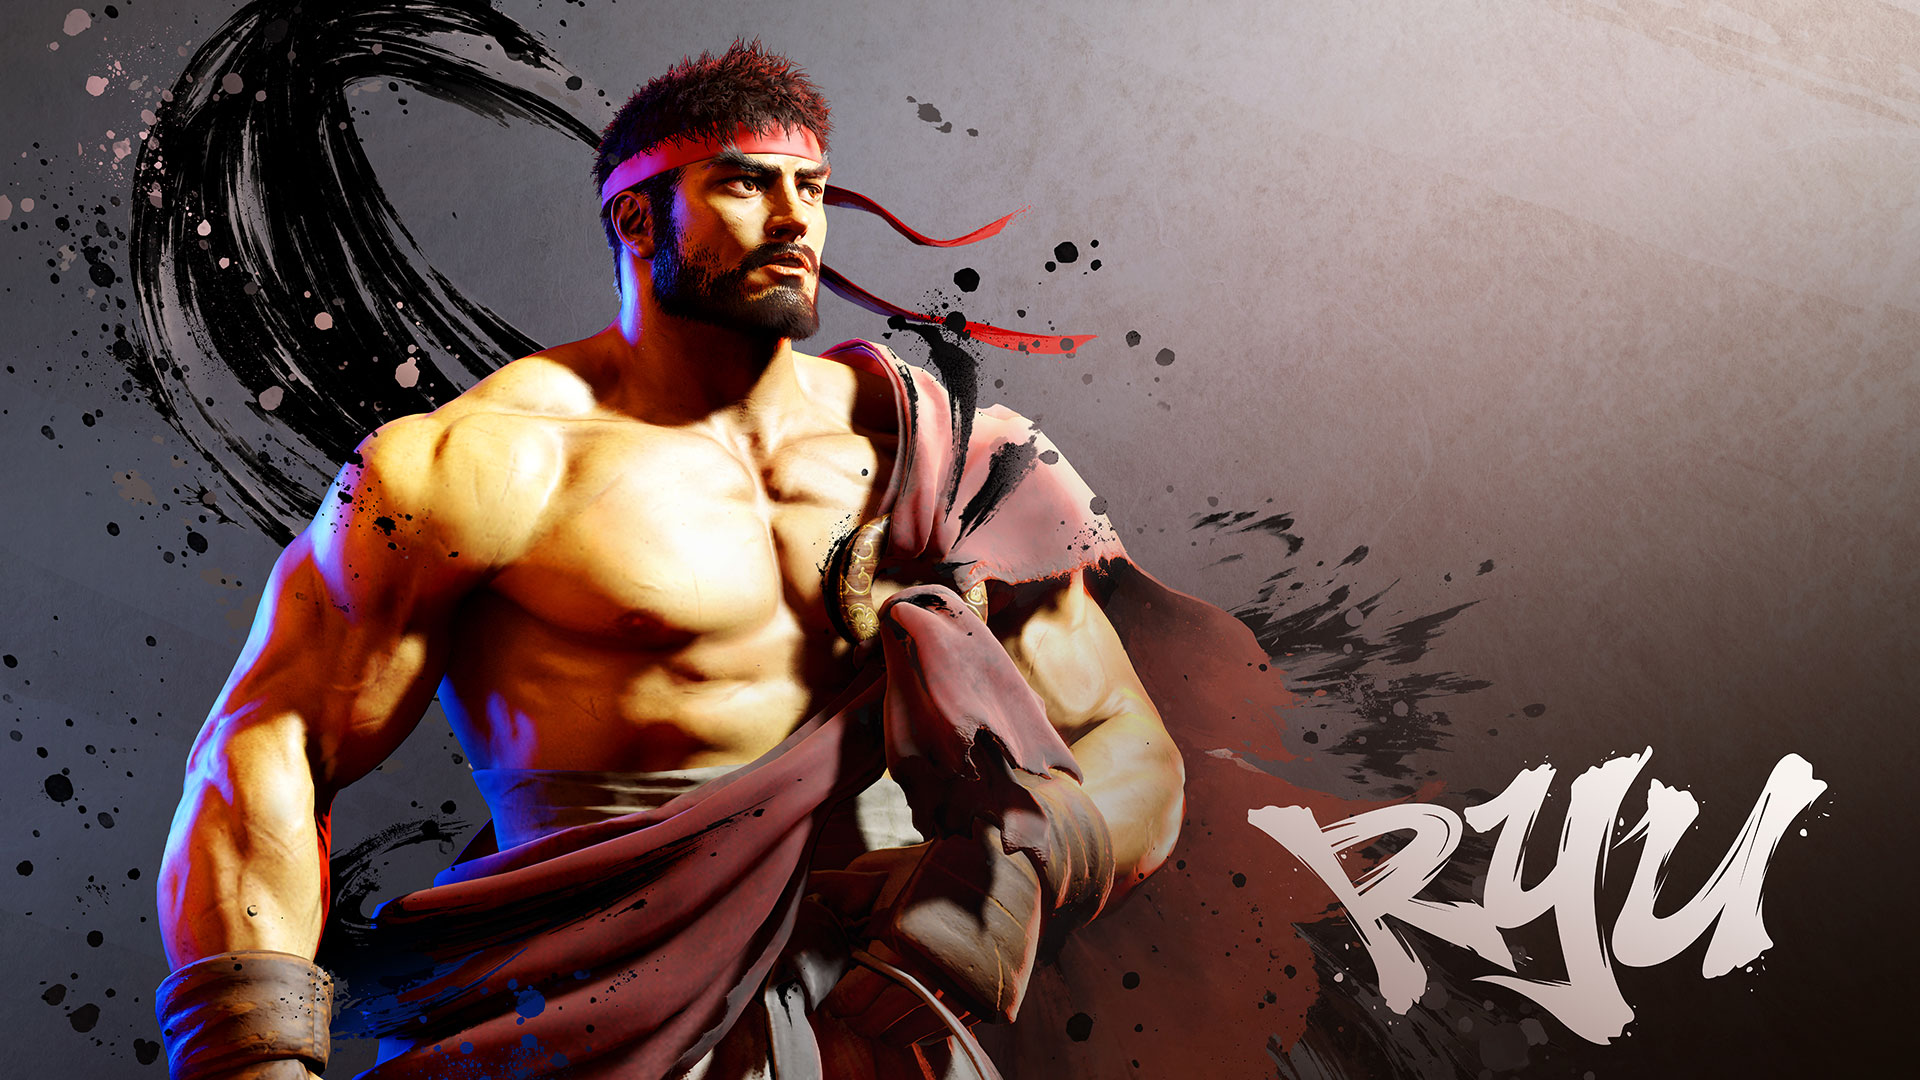 Street Fighter's Ryu isn’t broke and jobless after all? Fans’ hobo theory officially proven false 